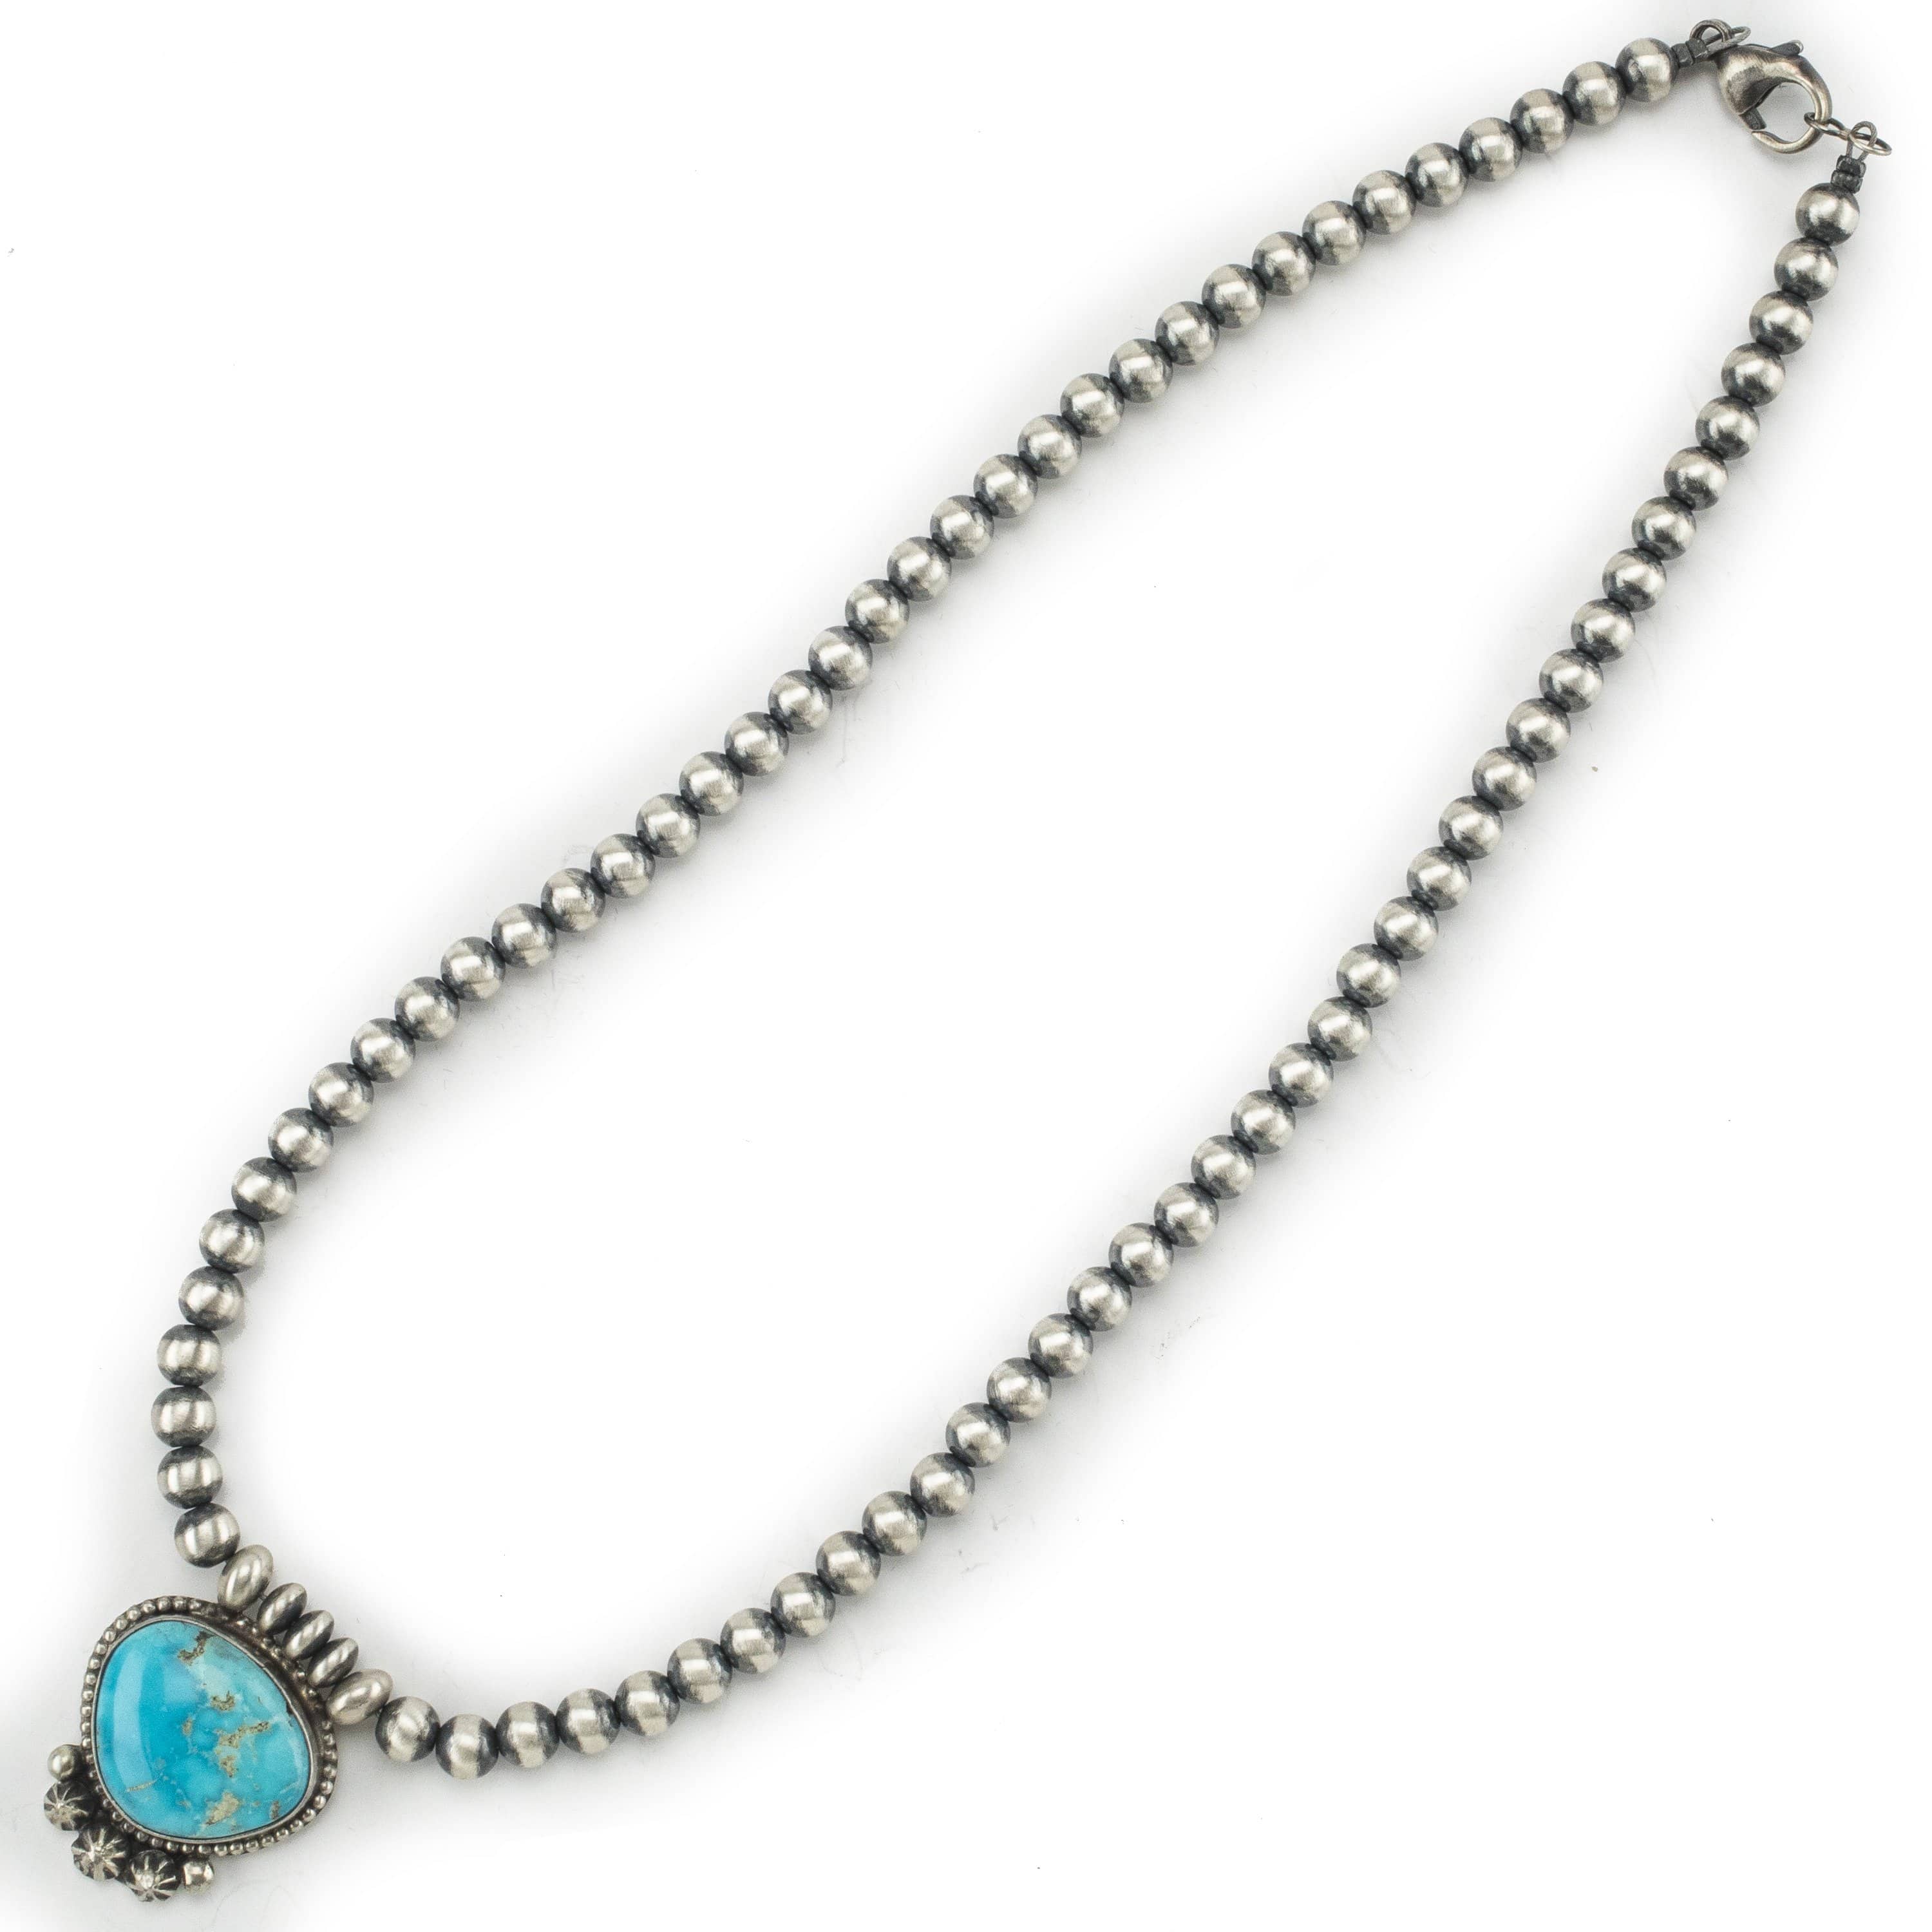 Kalifano Native American Jewelry Kee-J Sonoran Rose Turquoise Pendant and Attached Navajo Pearl USA Native American Made 925 Sterling Silver Necklace NAN1300.003